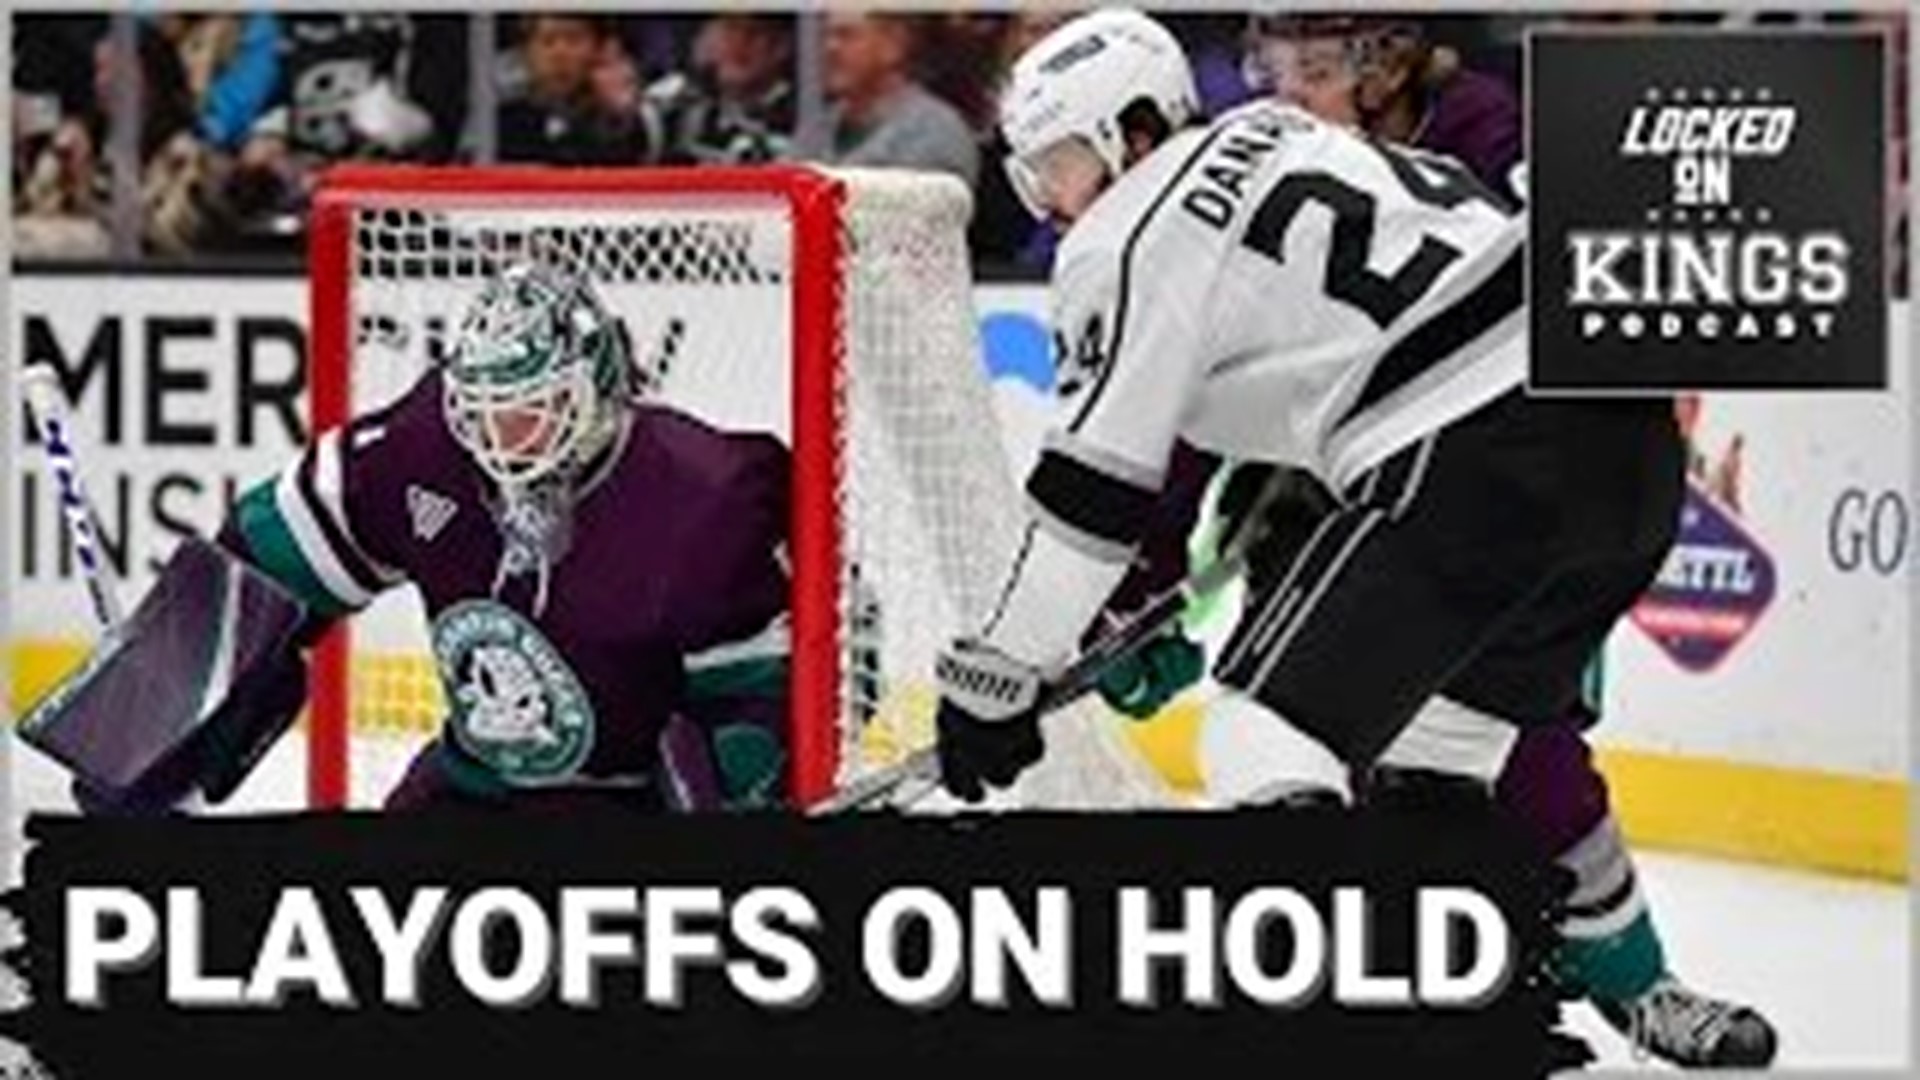 The Kings playoff party is on hold after a disappointing 3-1 loss to the Ducks.  We talk about that, this regular season for the Kings and look ahead to the playoffs